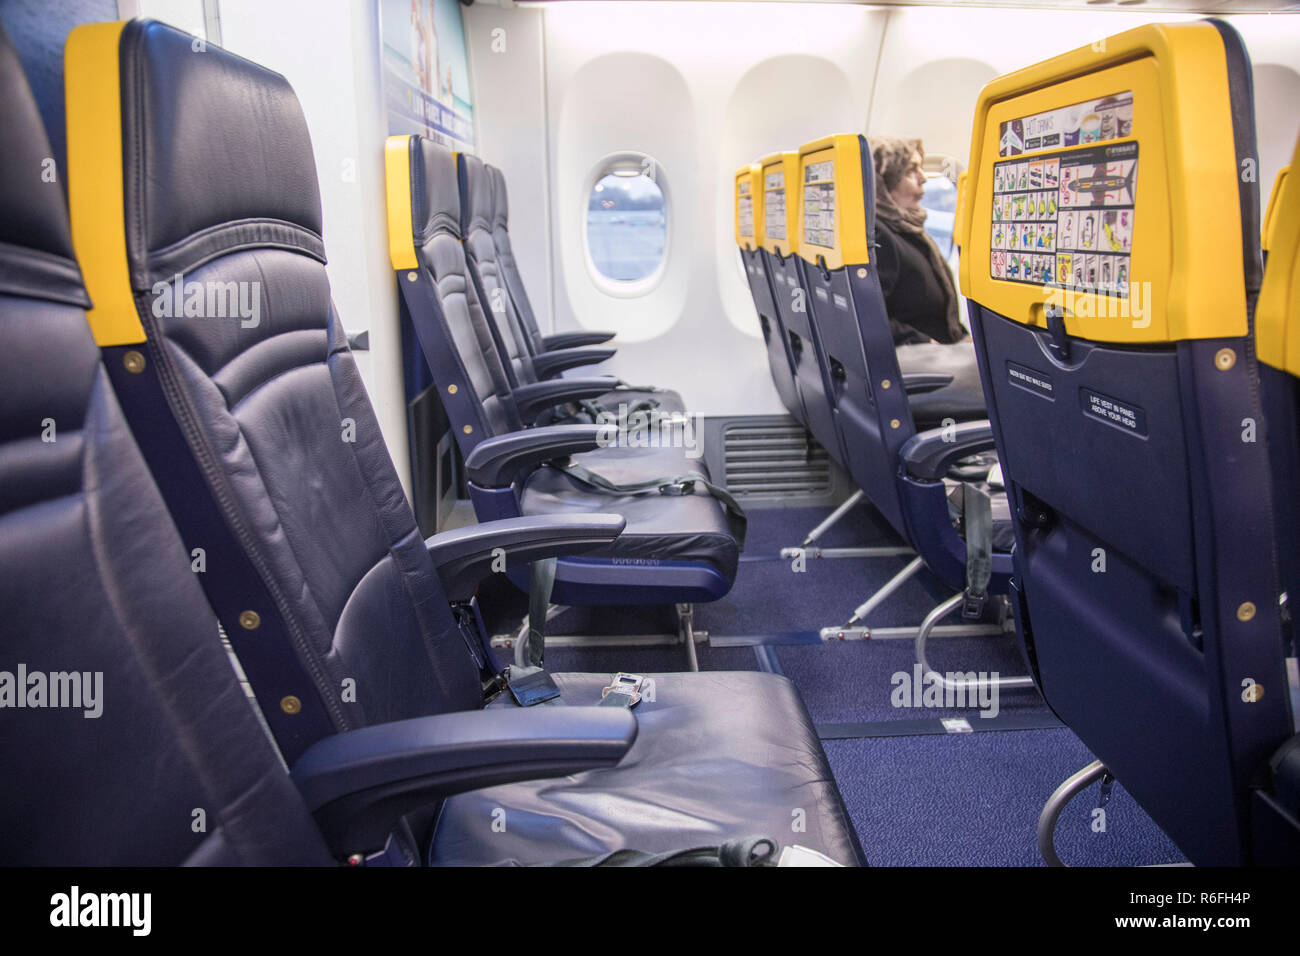 The New Boeing Sky Interior Cabin Of Ryanair The Aircraft